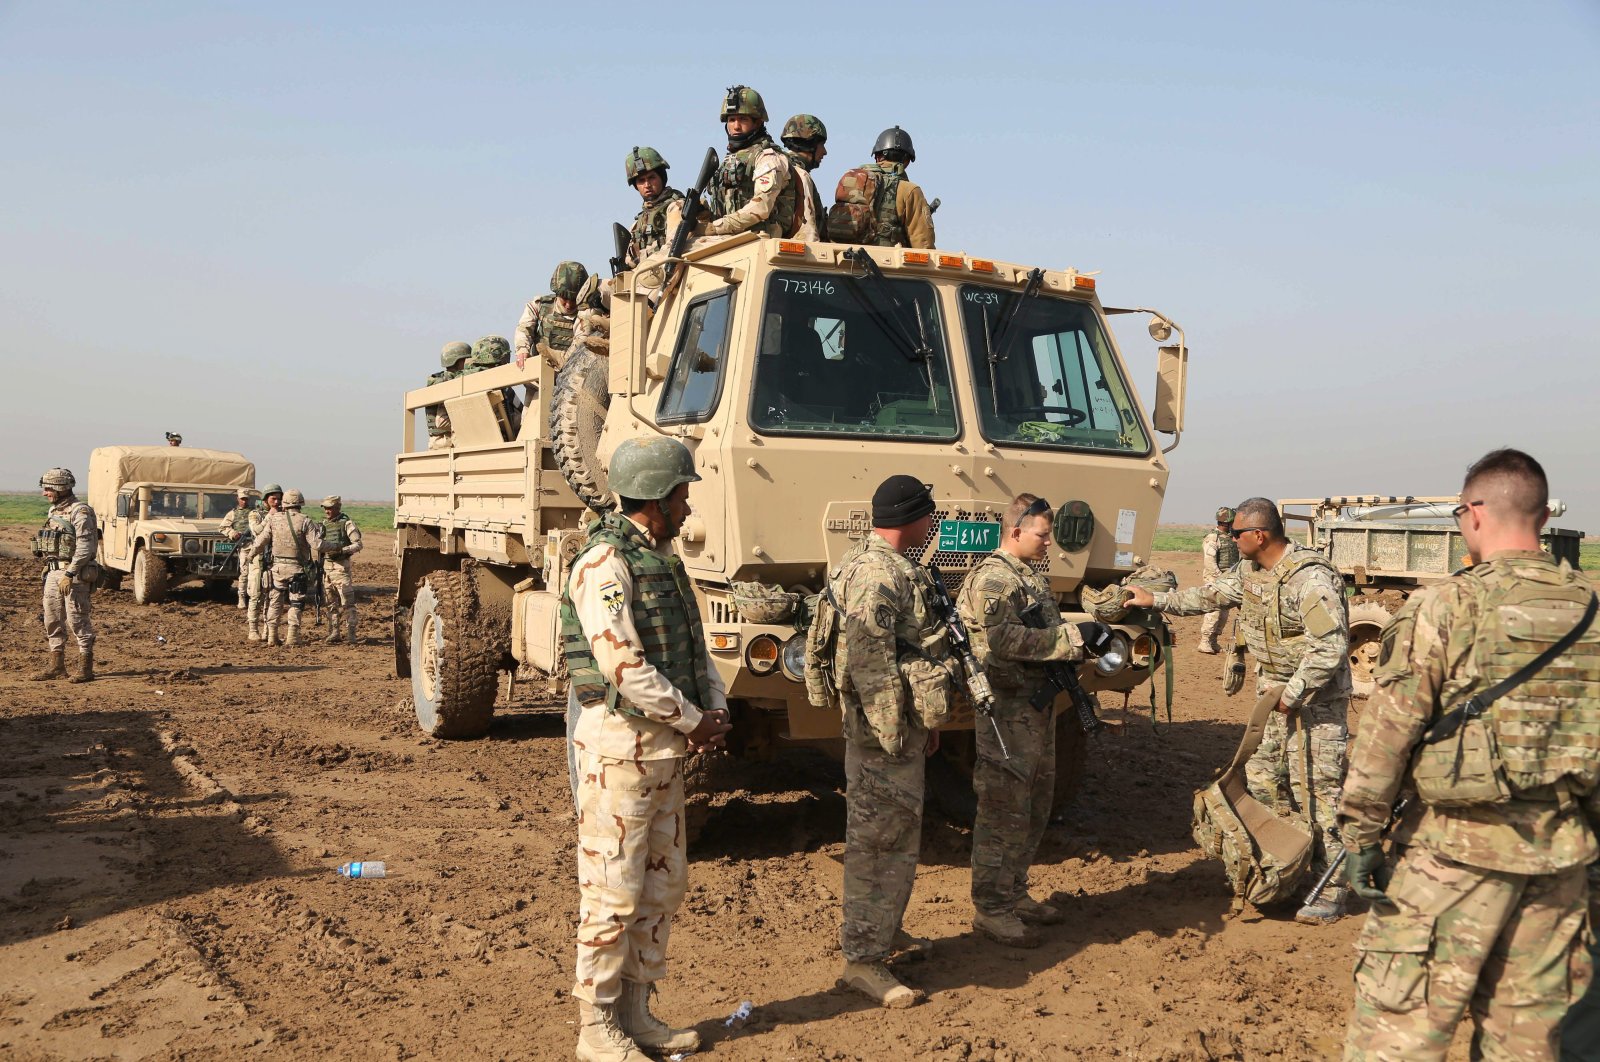 Iraqi soldiers participate in a training exercise with American and Spanish trainers at Basmaya base, southeast of Baghdad, Jan. 24, 2016. (AP Photo)